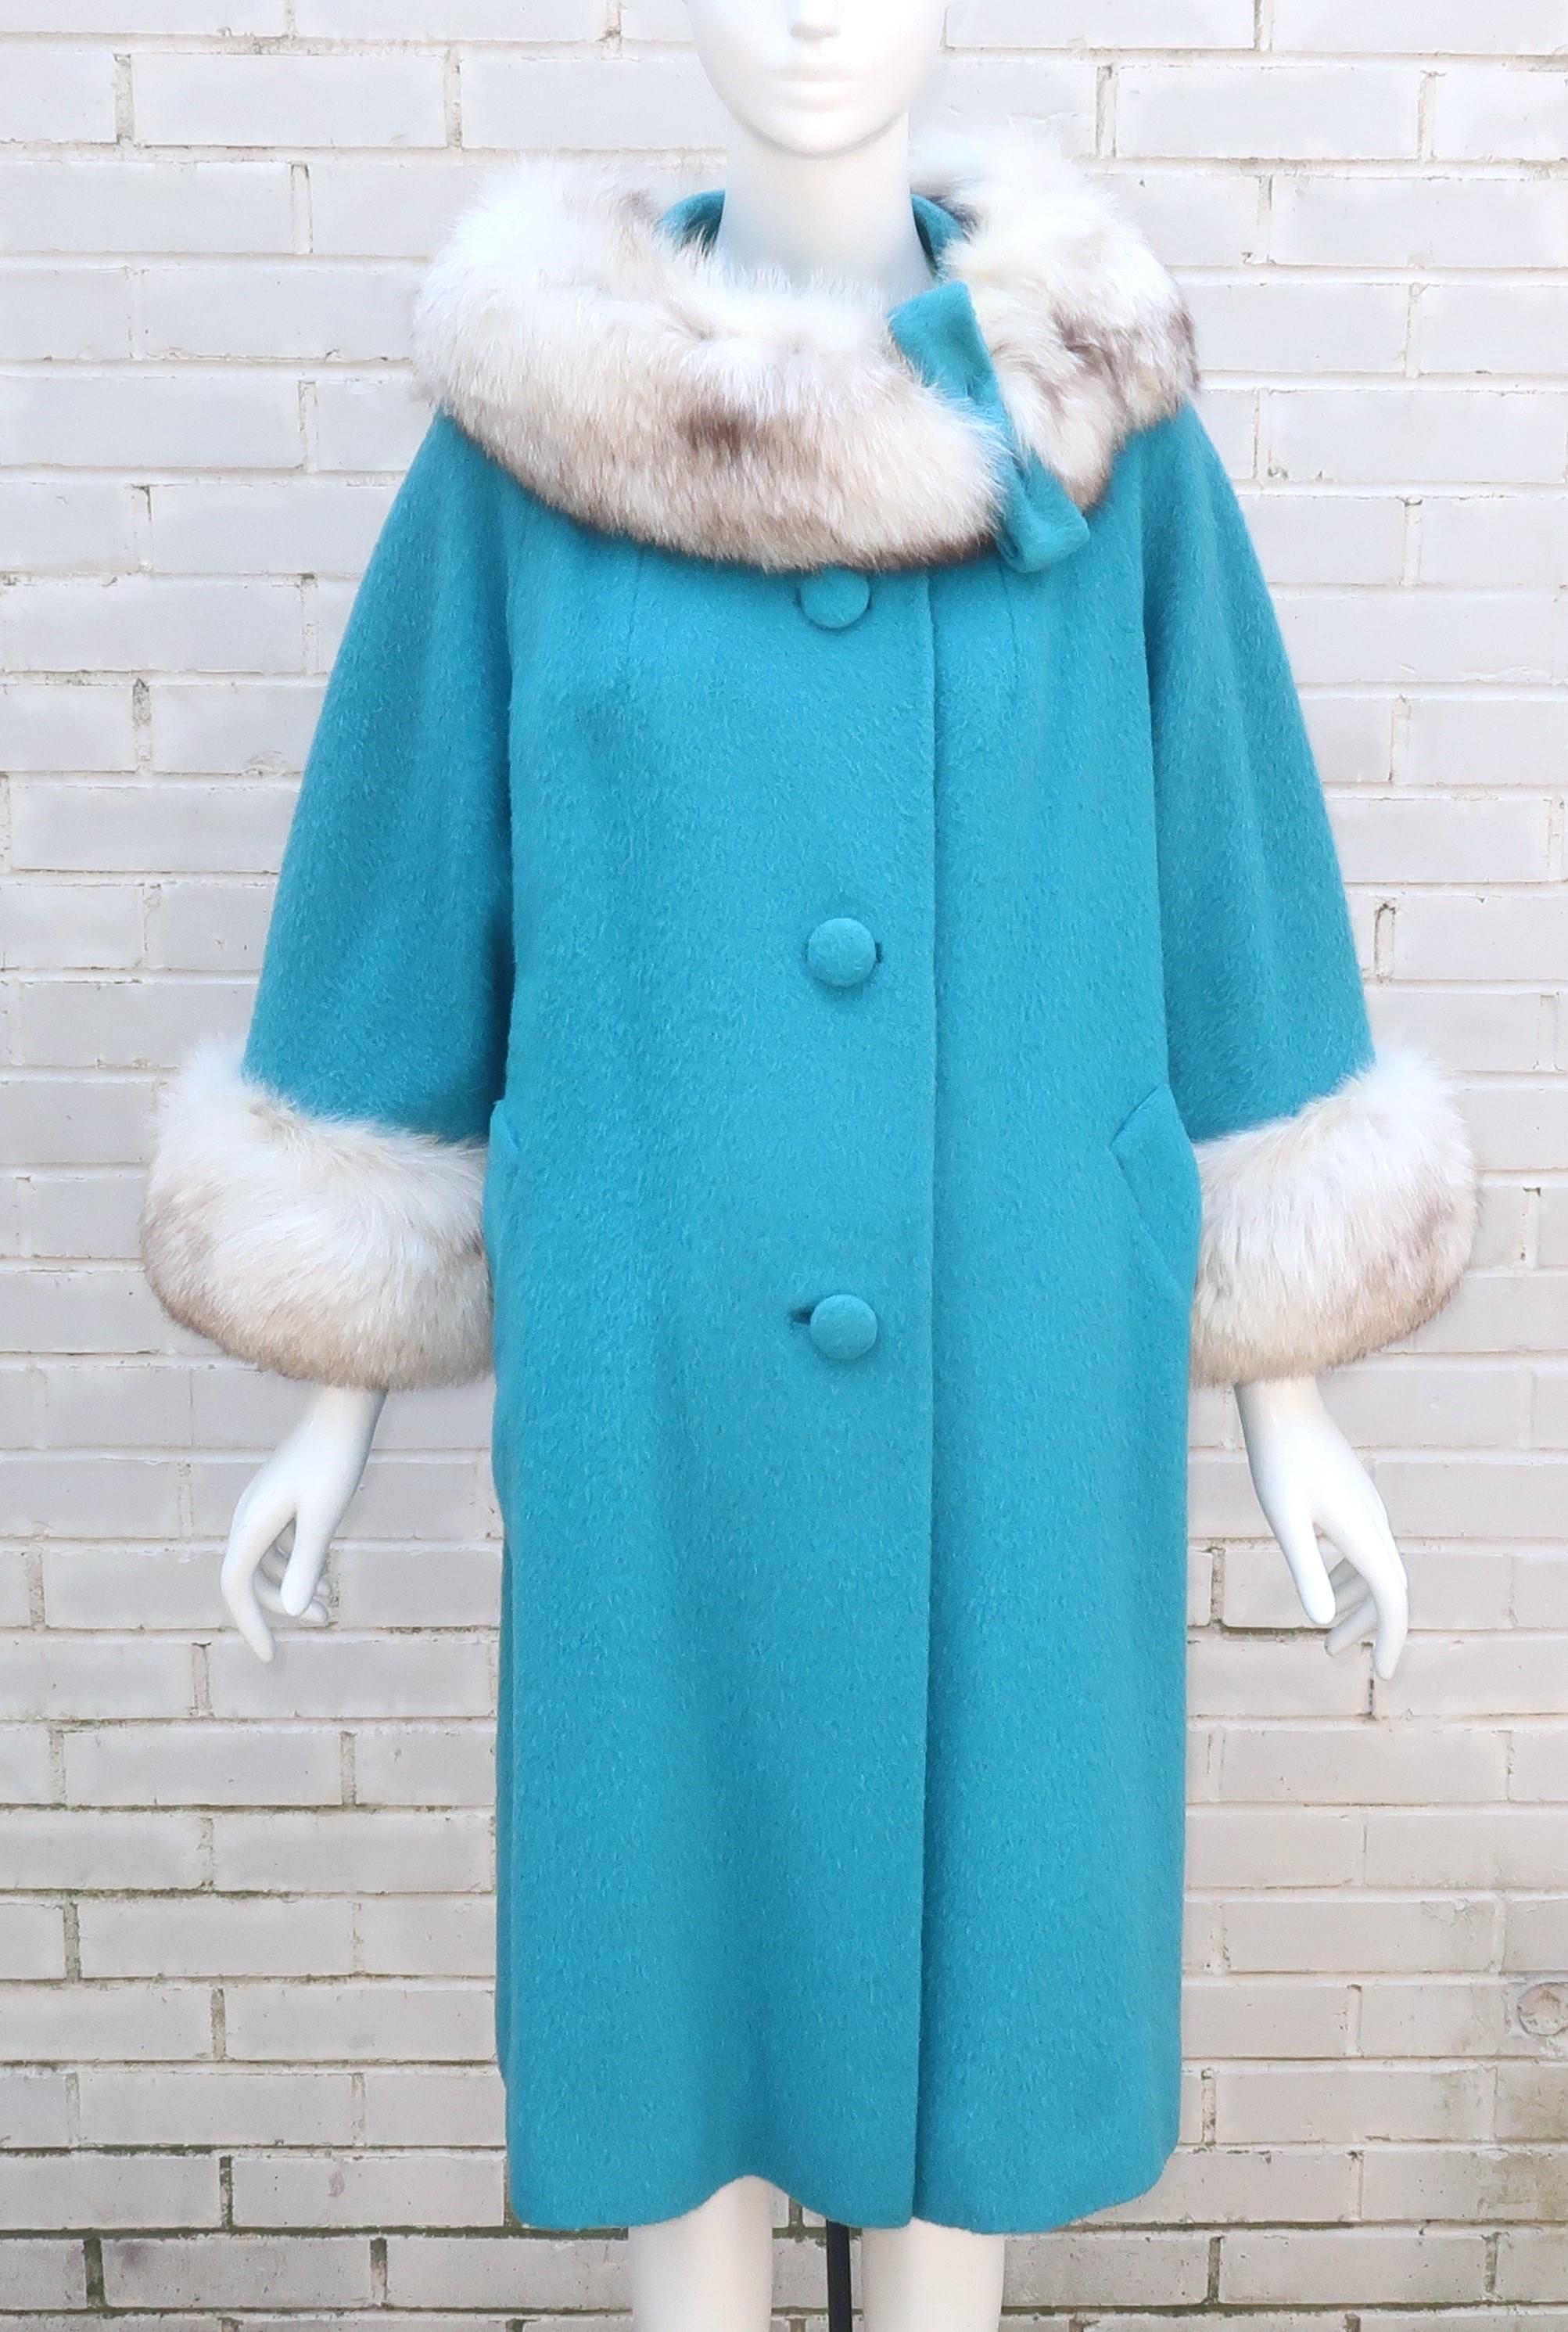 Glamour alert!  Designed under the artistic direction of Adolph Schuman for his company Lilli Ann, a fabulous aqua blue French wool coat with lush fox fur trim at the collar and cuffs.  This has a classic 1960's silhouette with relaxed shoulders, an